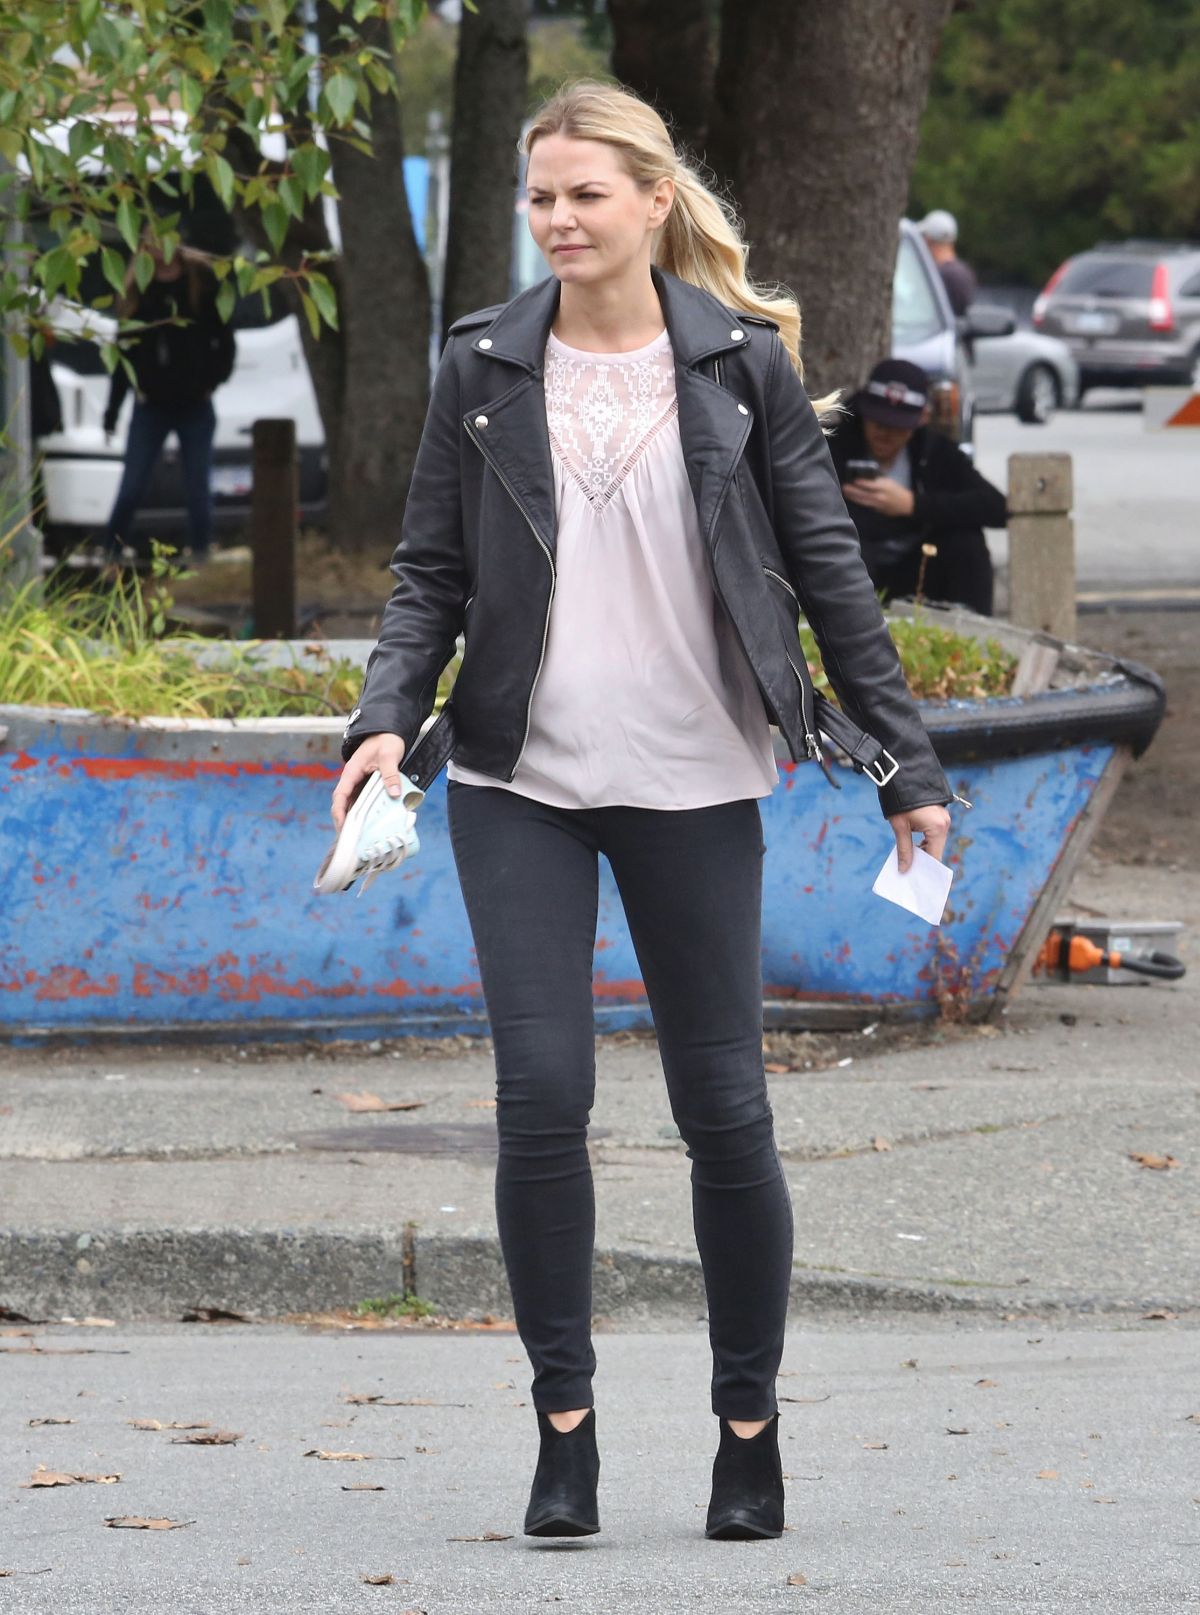 jennifer-morrison-on-the-set-of-once-upon-a-time-in-vancouver-08-03-2016_7.